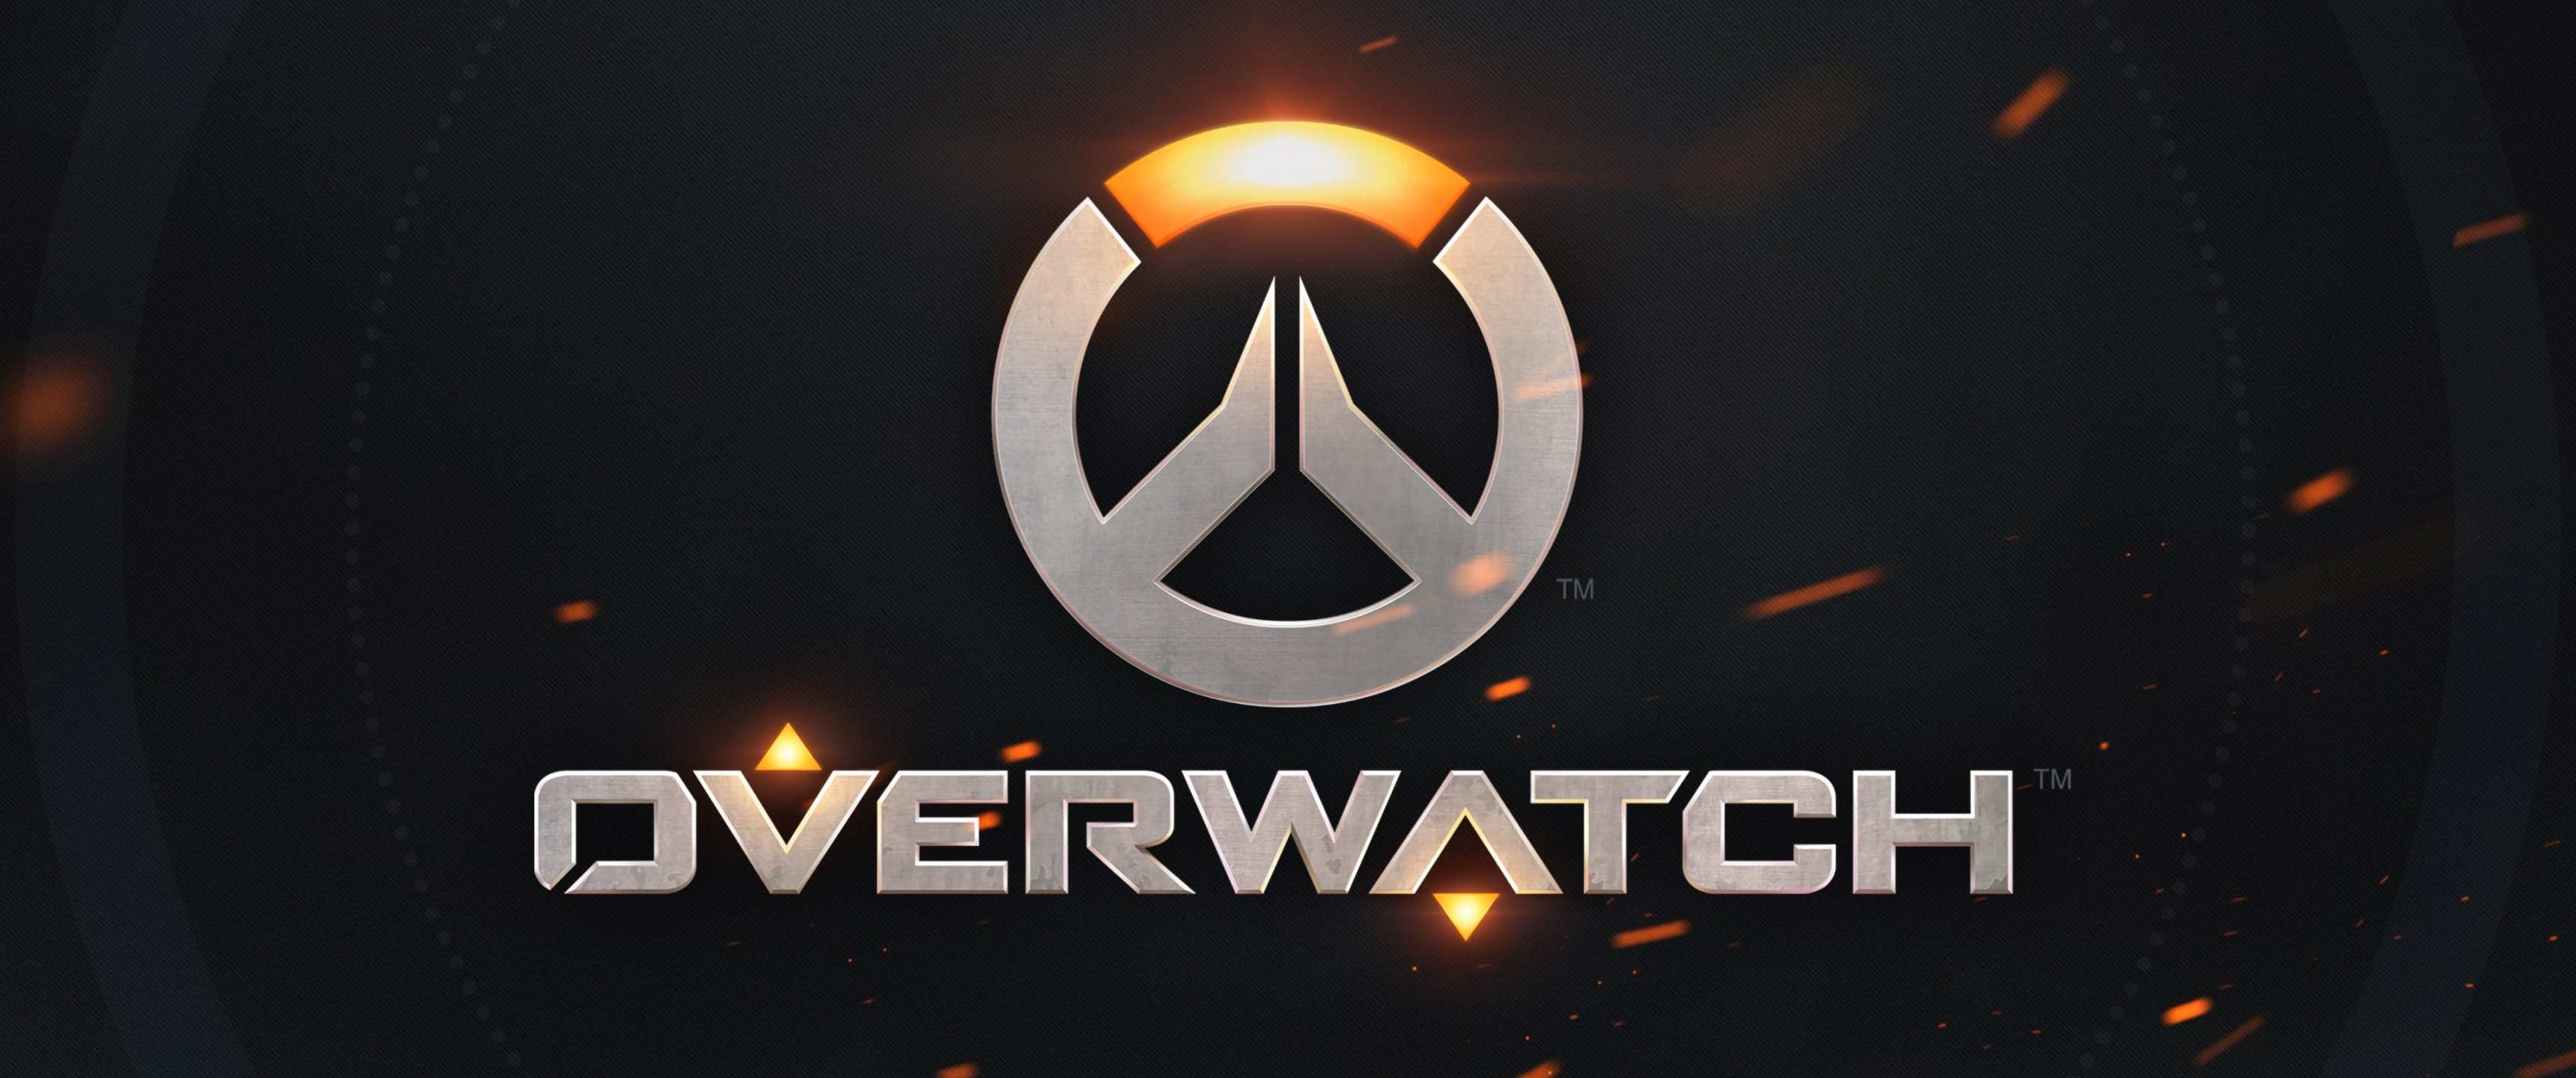 Overwatch Wallpaper 4K, PC Games, PlayStation Xbox One, Games